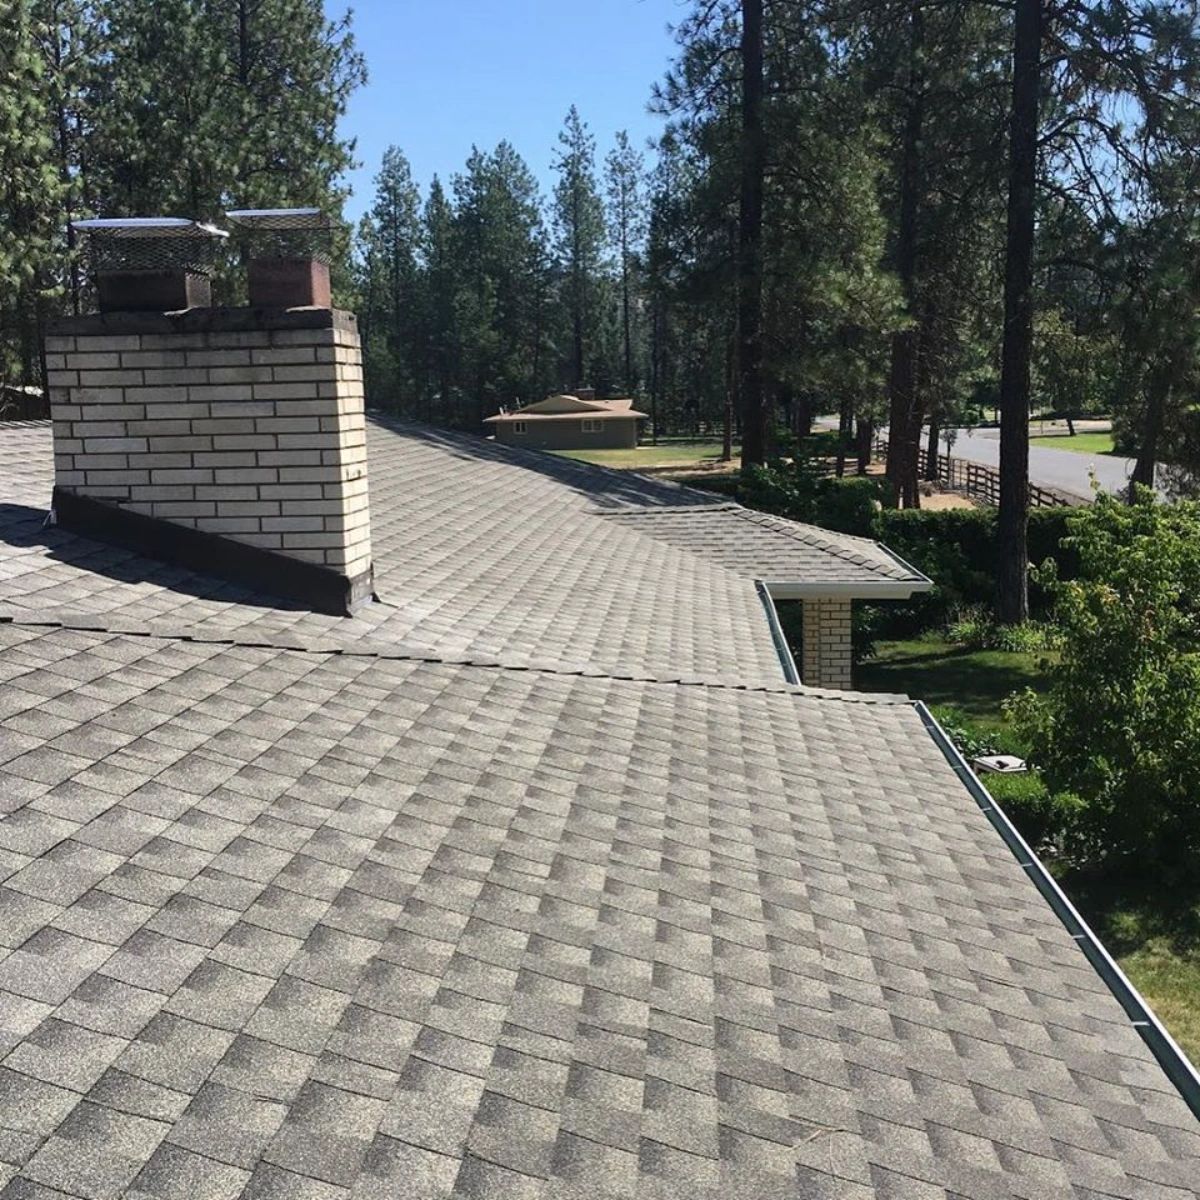 Your home is your investment -- let us help you protect it. Reach out at (509) 483-7100 for all your roofing, rain gutter, and garage door needs. #PerrenoudRoofing #roofing #spokane #raingutter #garagedoor